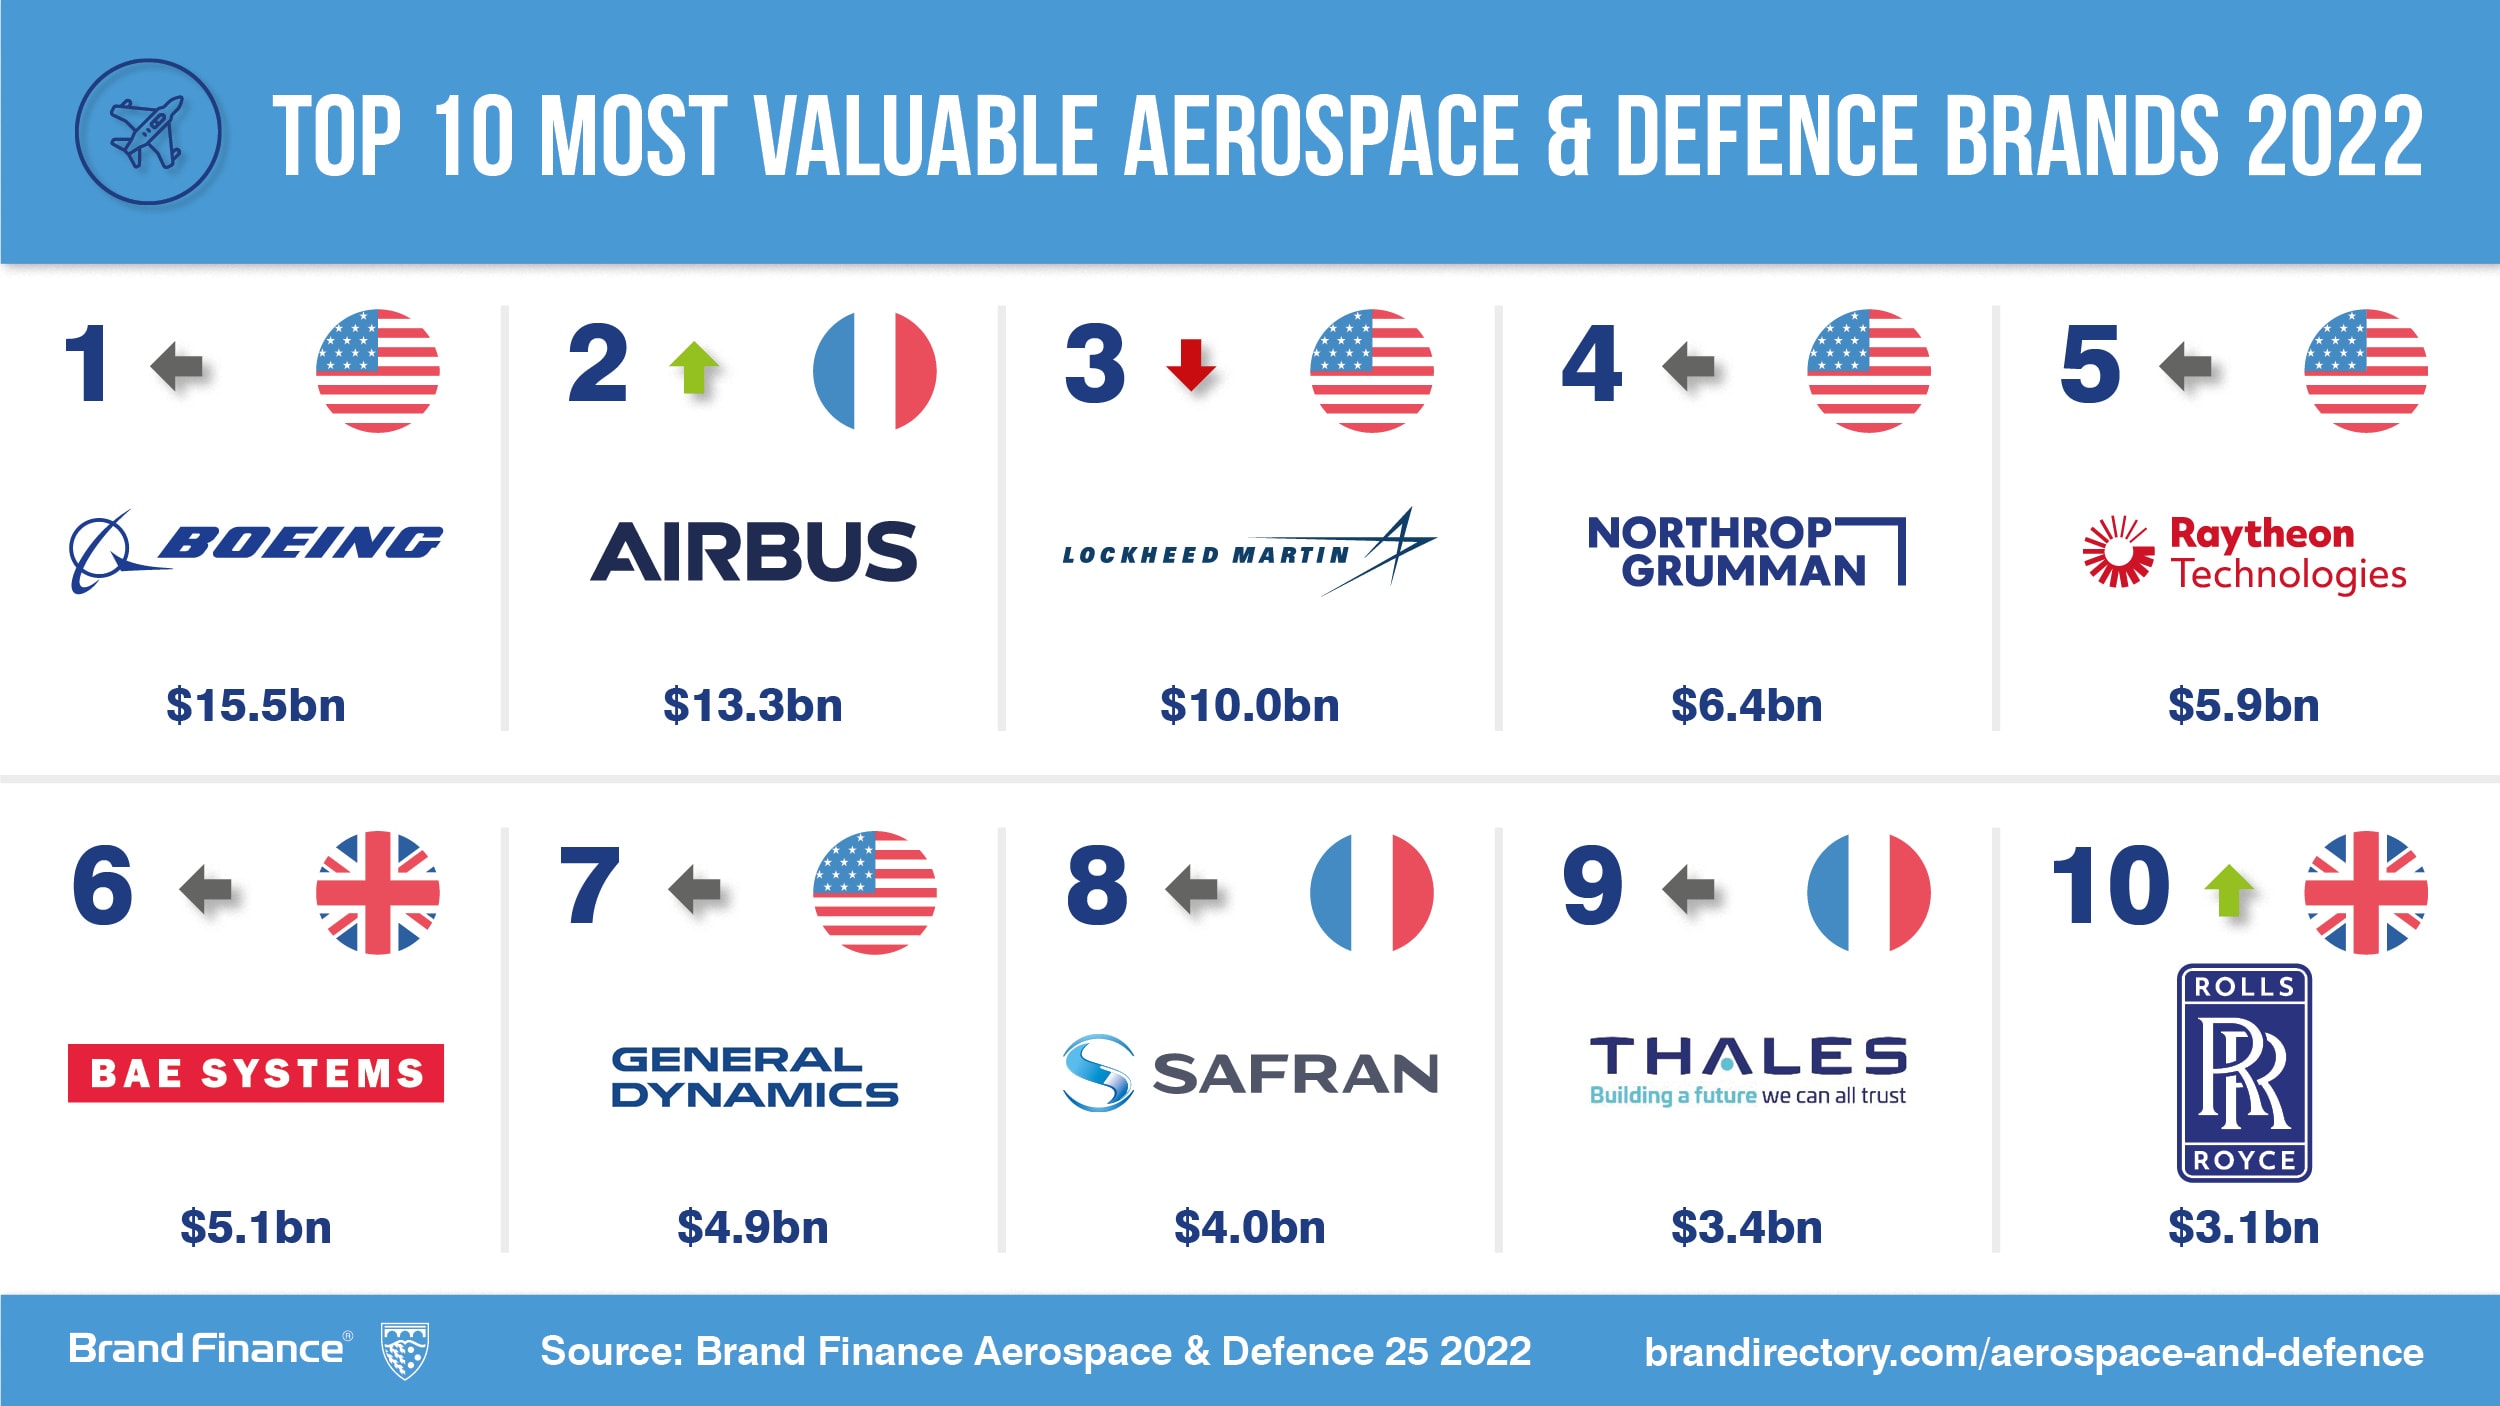 Boeing and Airbus grow at top of Aerospace and Defence brand rankings